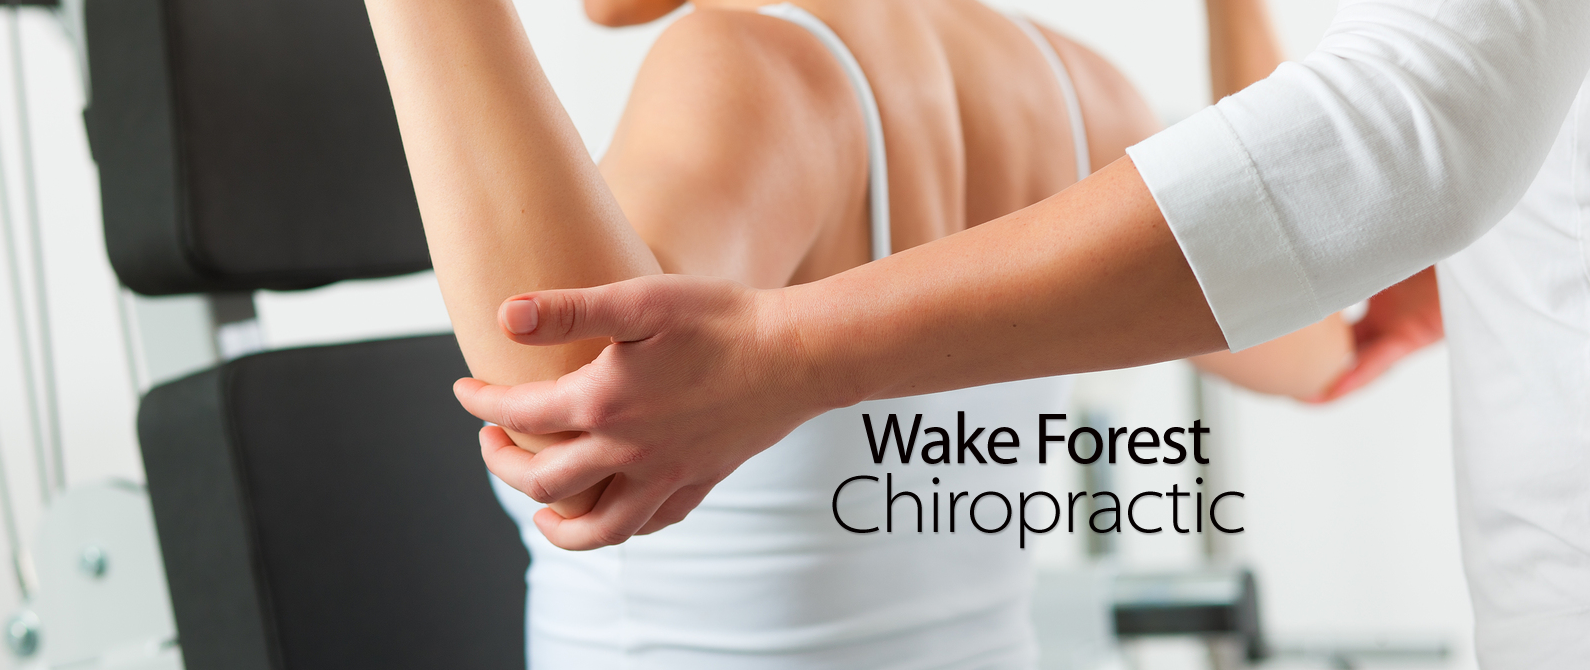 Wake Forest Chiropractic